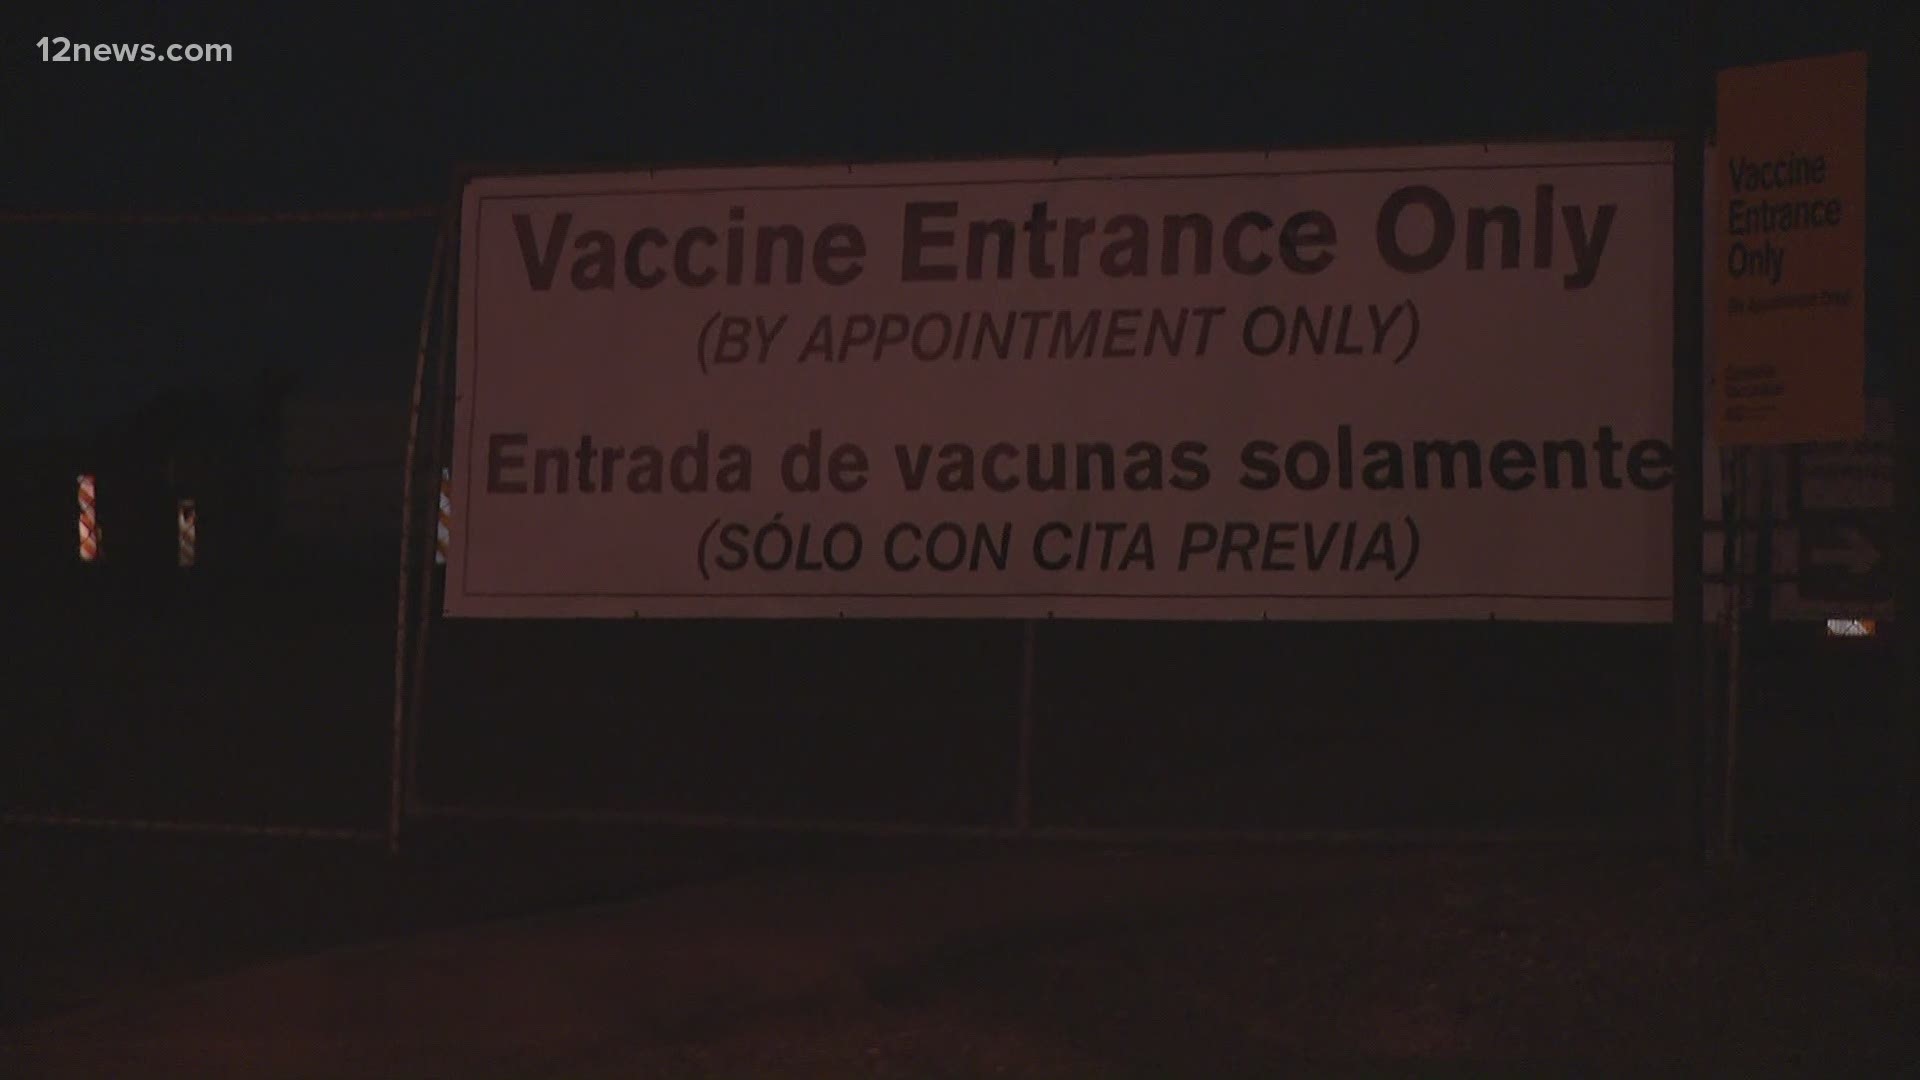 Arizona's second state-run site for COVID-19 vaccinations is opening Monday, but appointments have been booked through February. Team 12's Jen Wahl has the latest.